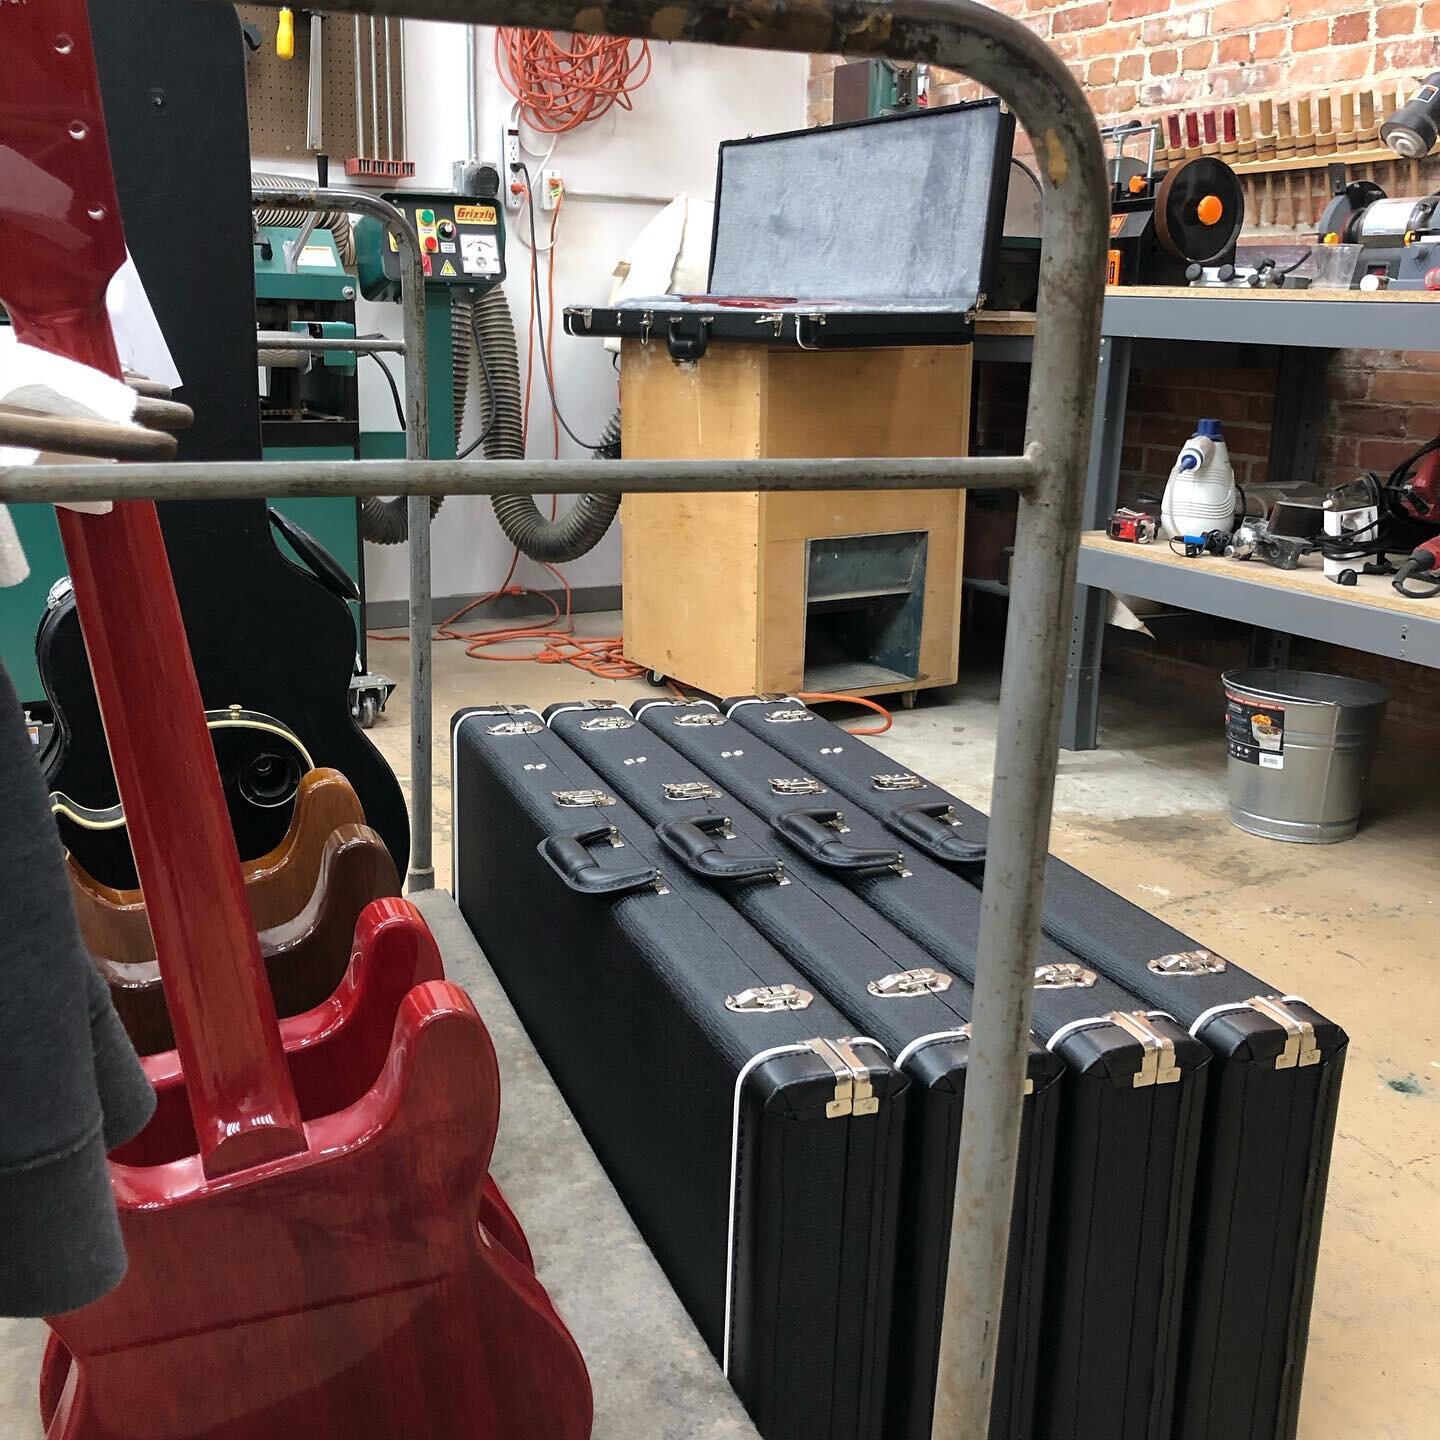 Ahhh, new case smell. Our new Edison #tkl custom #cases have arrived from our Canadian friends from the north. Form fit, double neck support, end bound, leather handle, and all the other features of the Premier series.